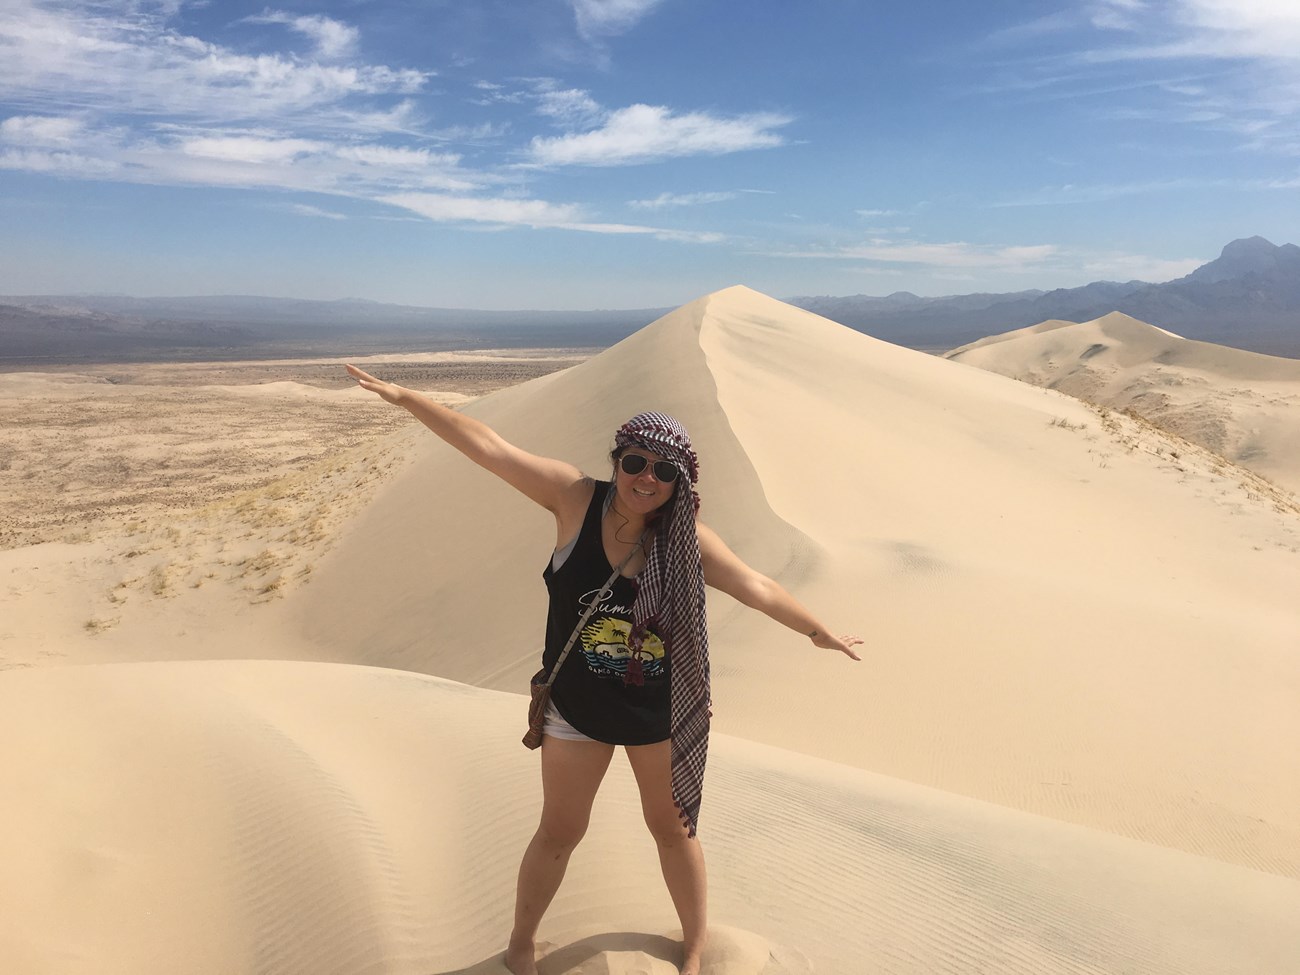 A female hiker wearing white shorts, a black tank top, and a fabric head covering smiles with arms outstretched on top of the Kelso Sand Dunes.